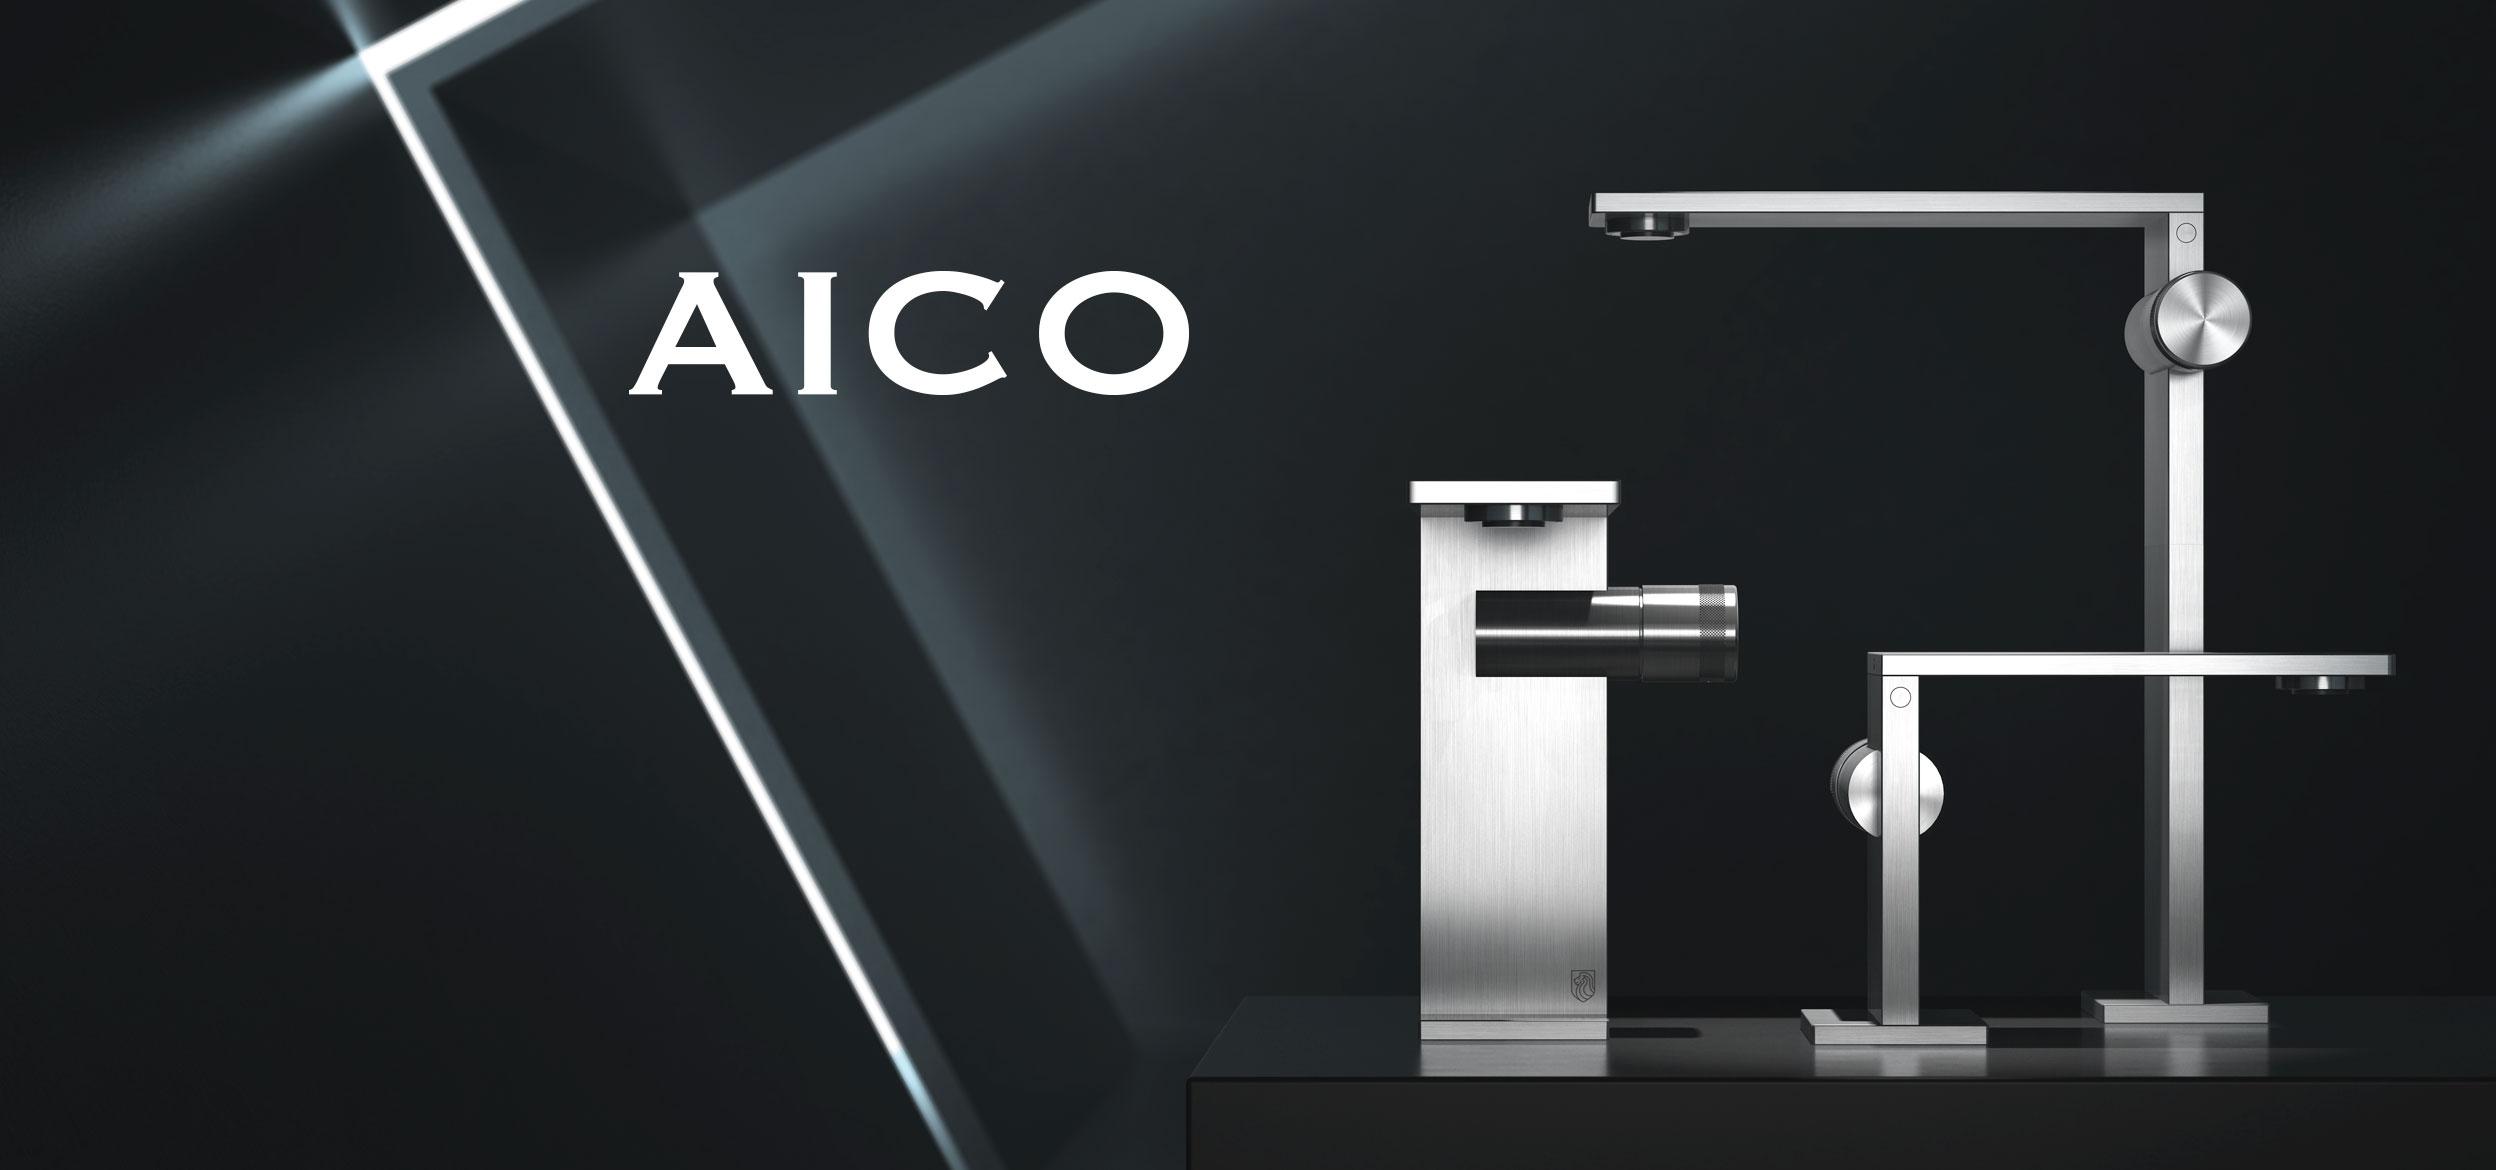 AICO – the first step in the world of RADOMONTE.